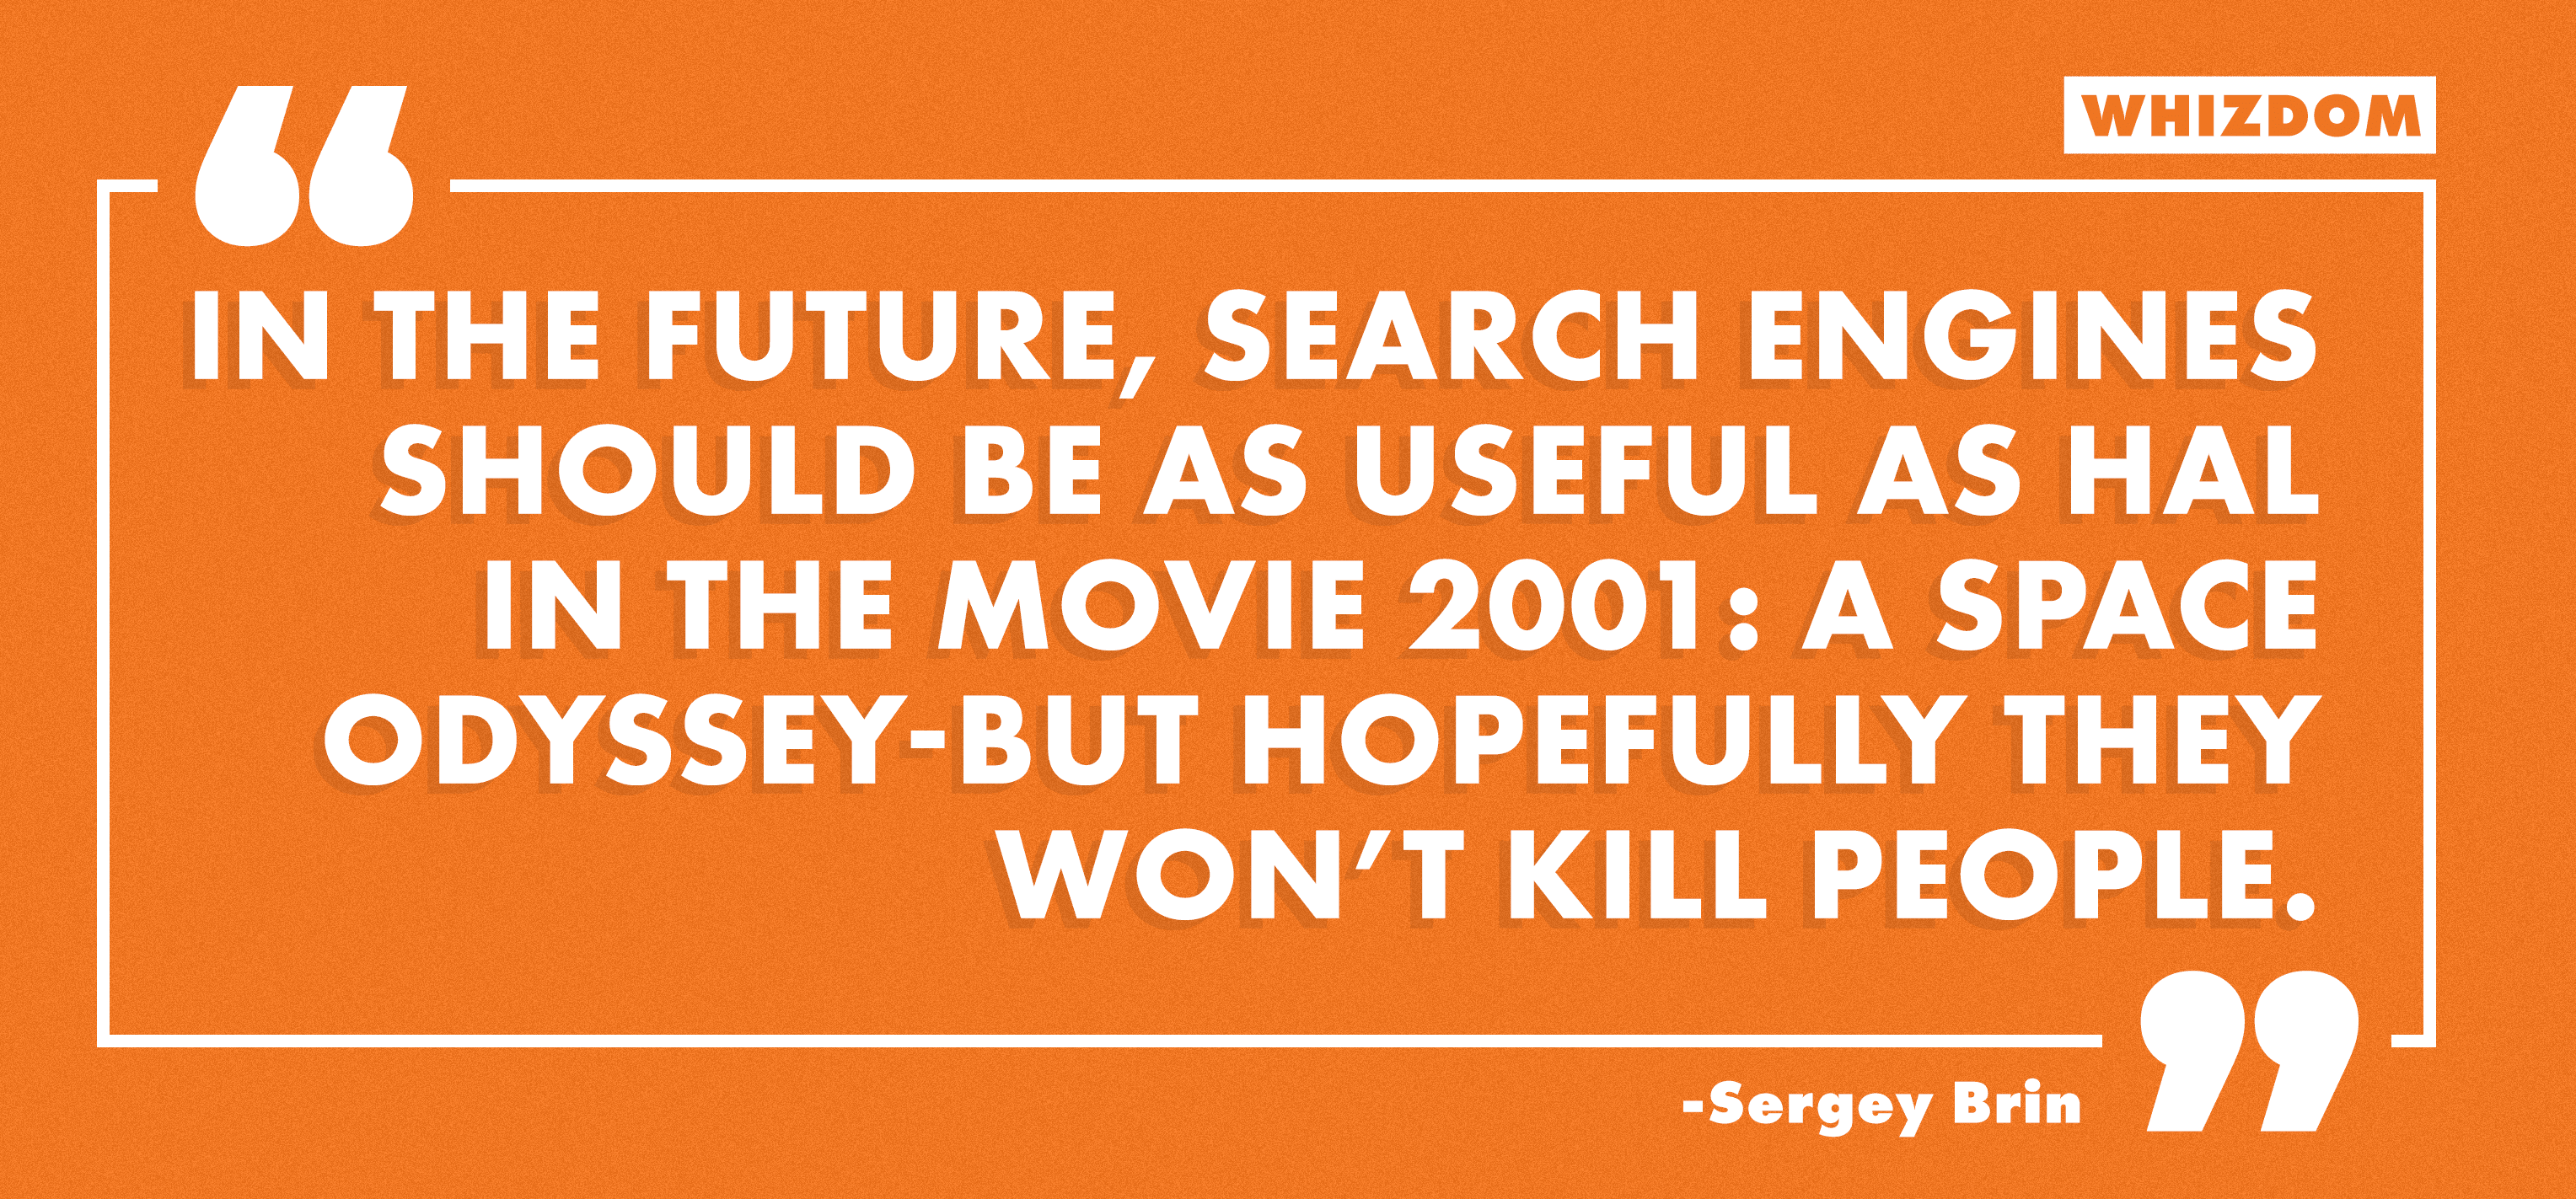 an orange banner showing a quote from Sergey Brin about the future of search engines